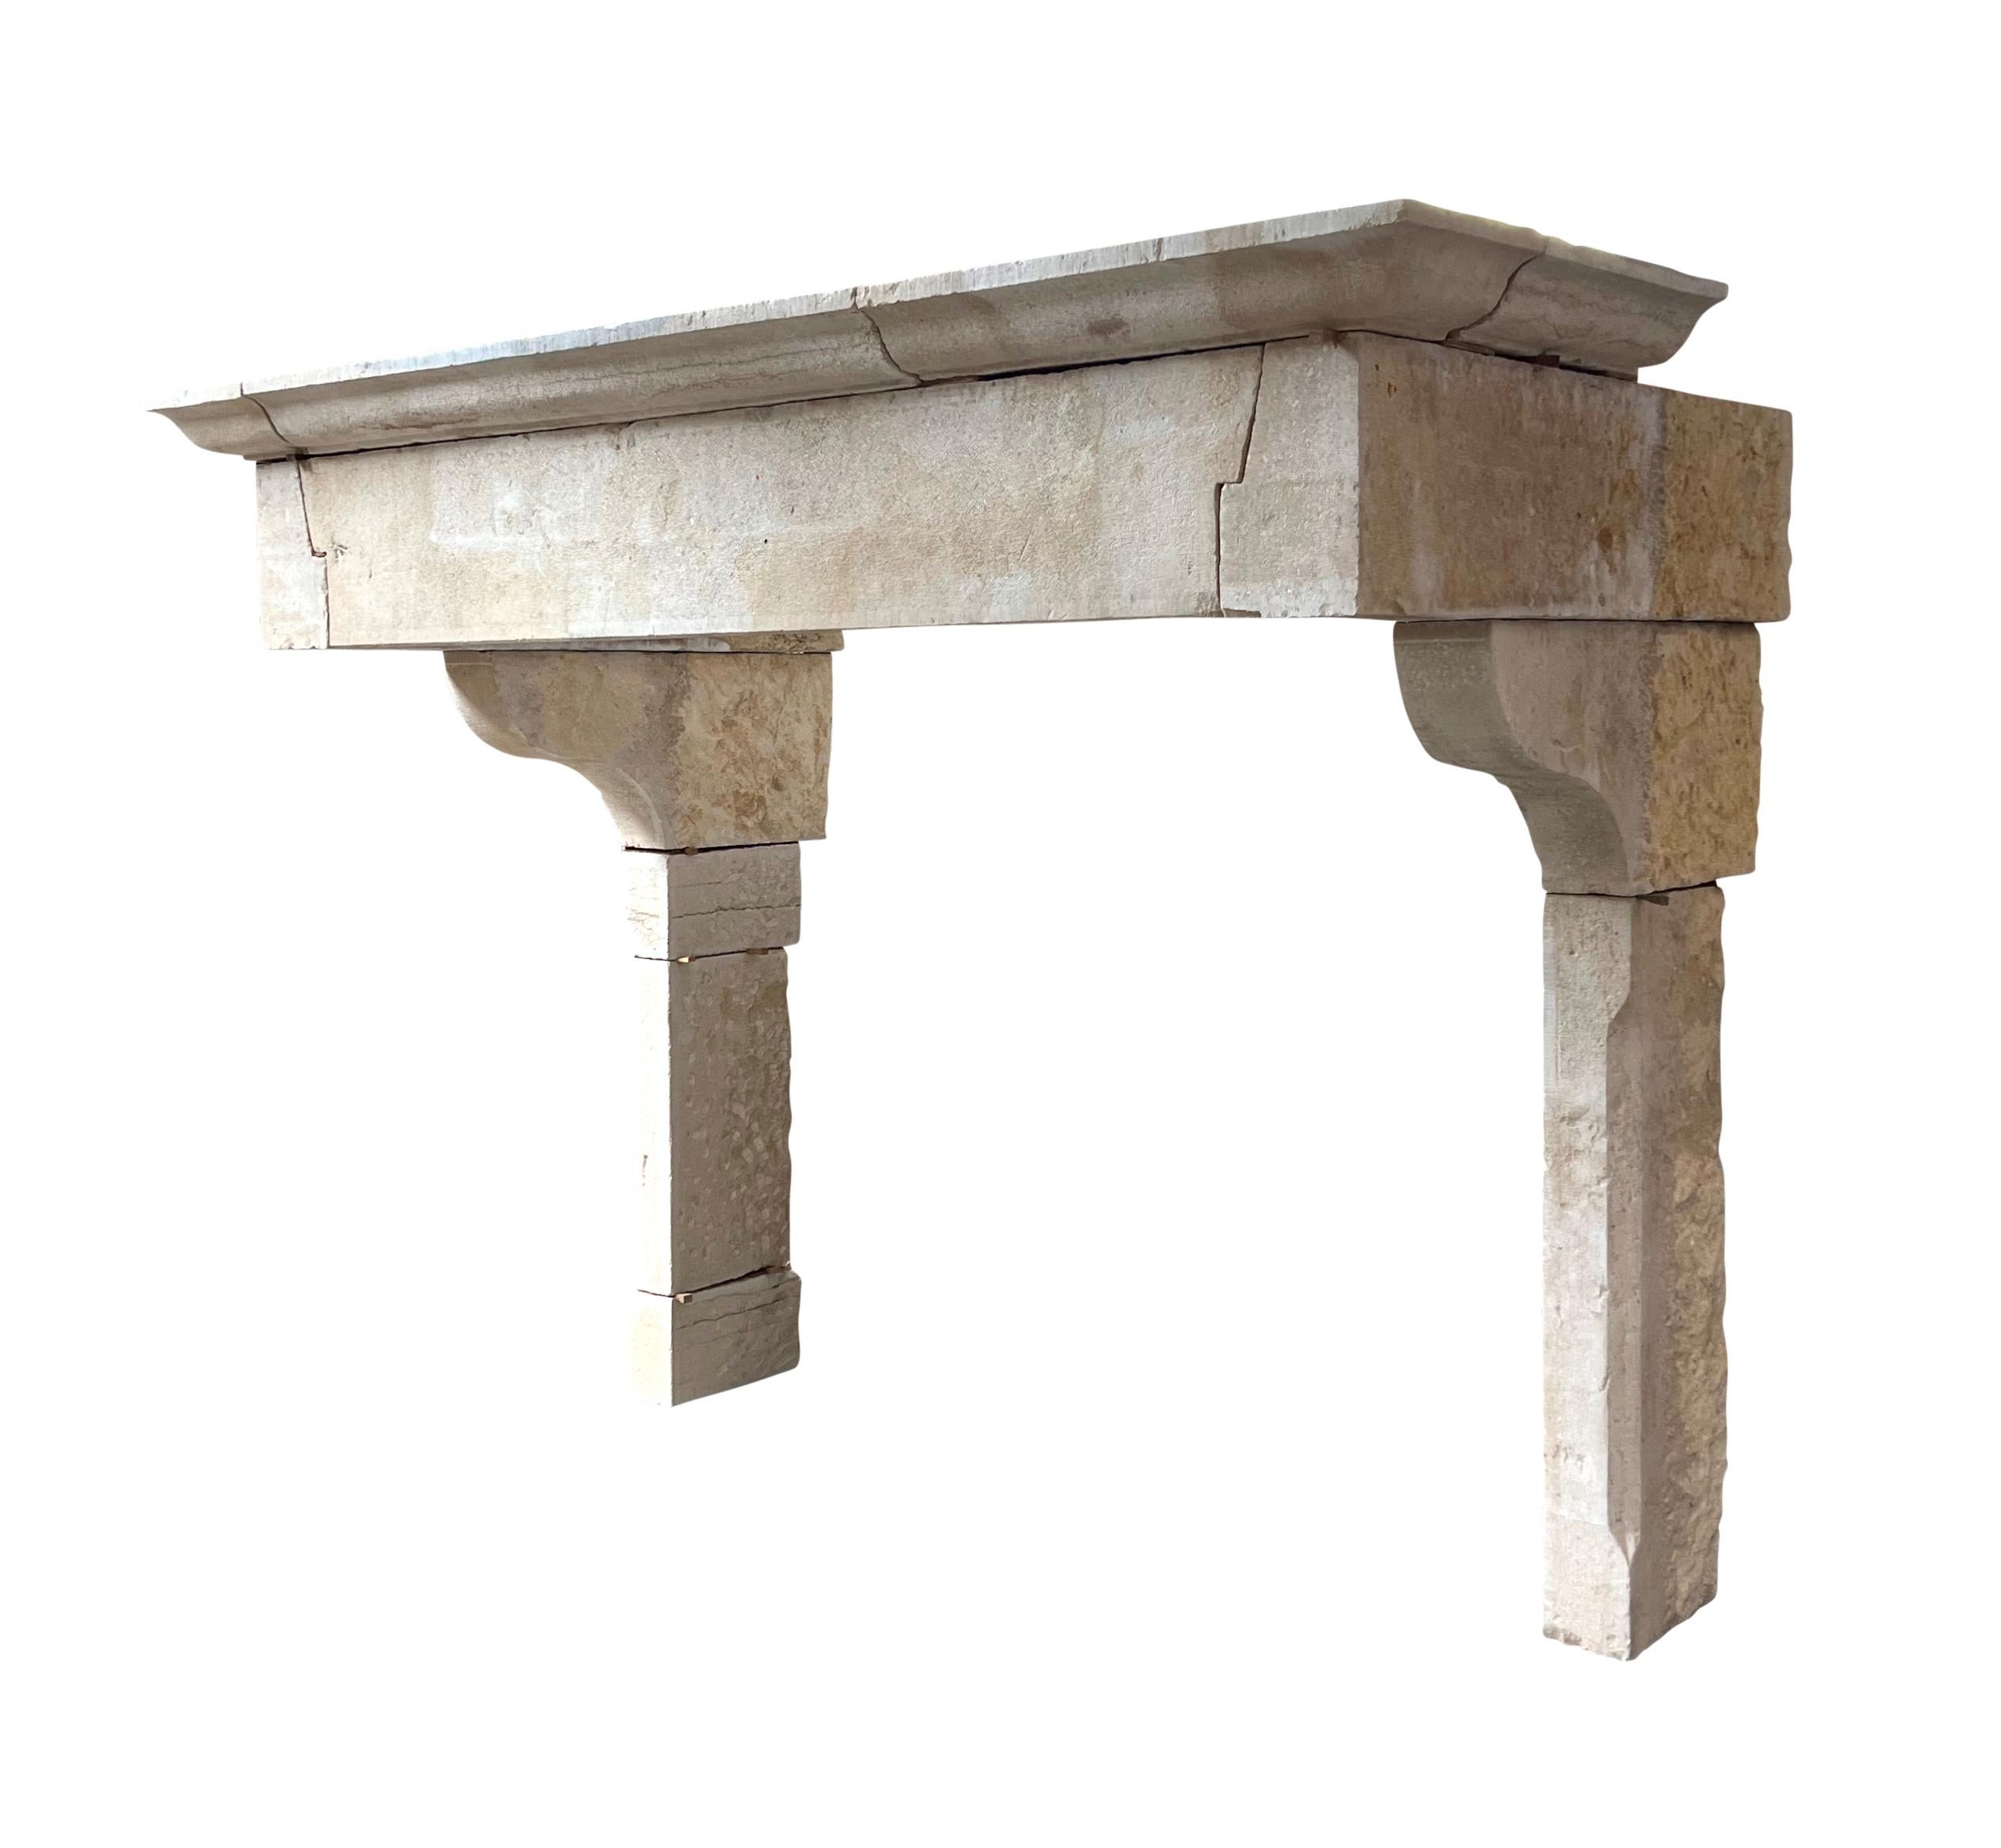 Statement stone fireplace surround in great condition for a timeless cottage or castle style home decor.
The beige hard limestone blend well in any kind of interior styling.
The proportions of this unique antique piece are extreme grand.
Original